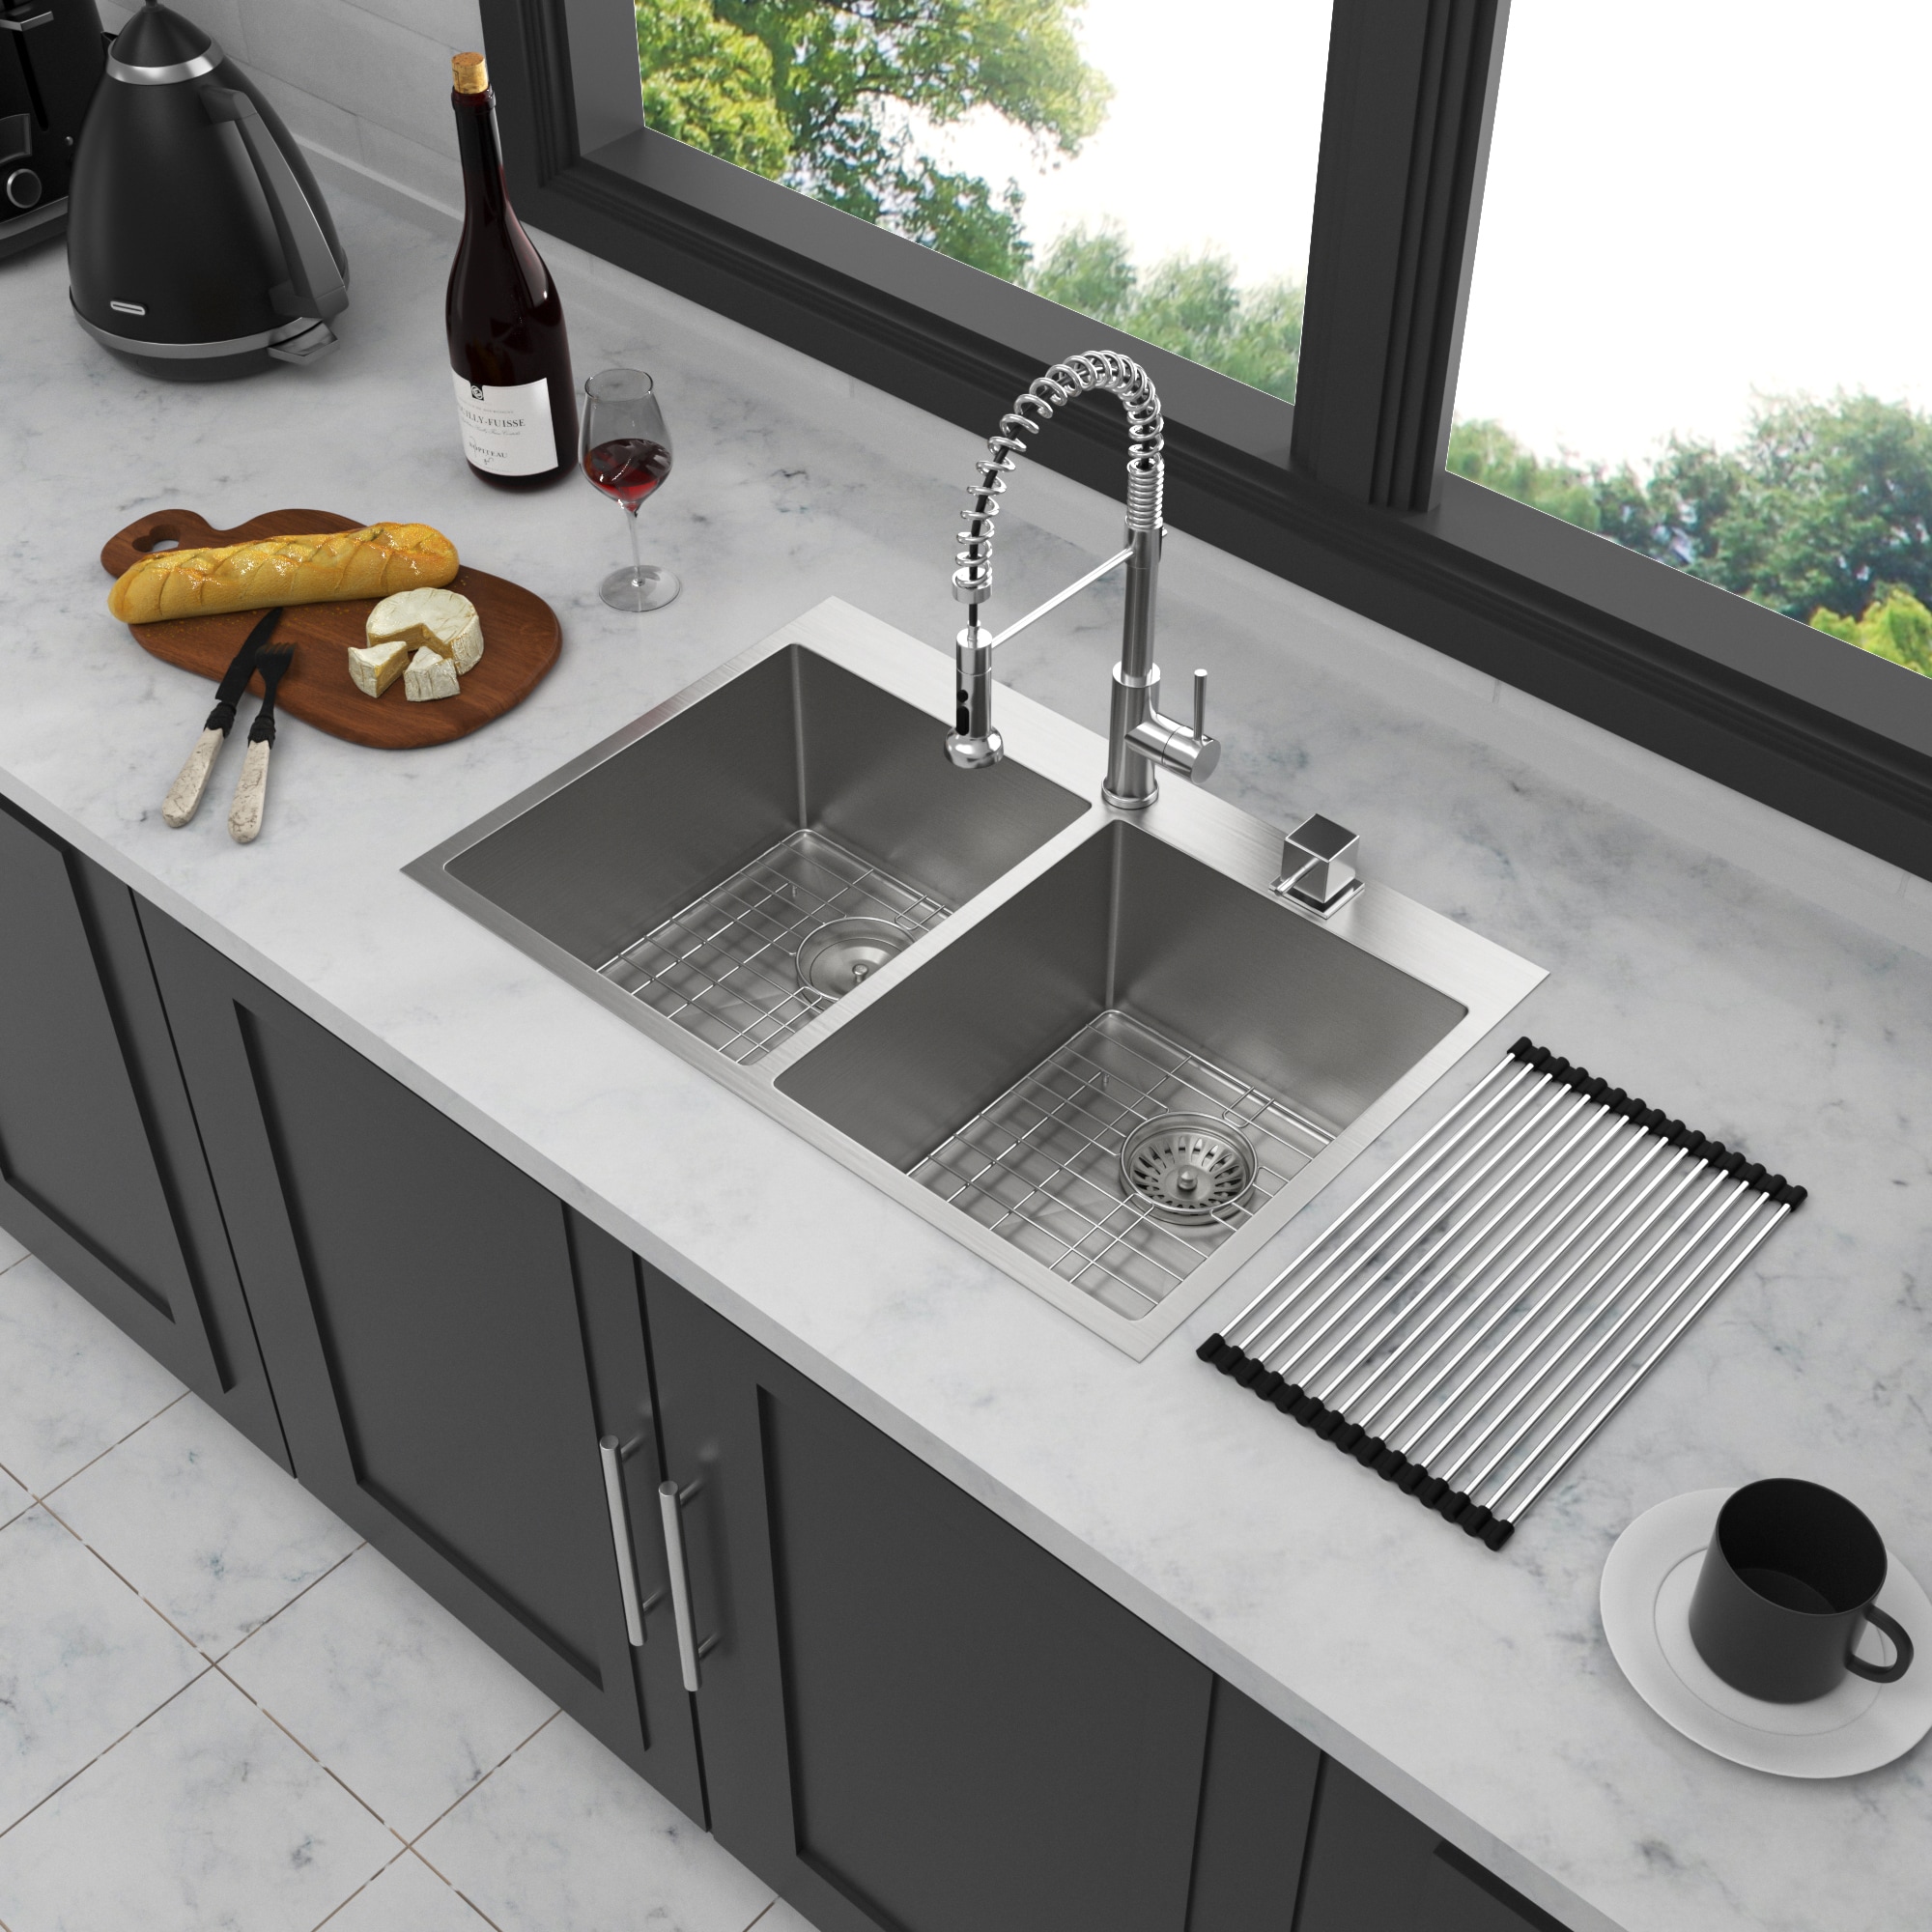 Stylish S-501XG 33 inch Slim Low Divider Double Bowl Undermount Stainless Steel Kitchen Sink